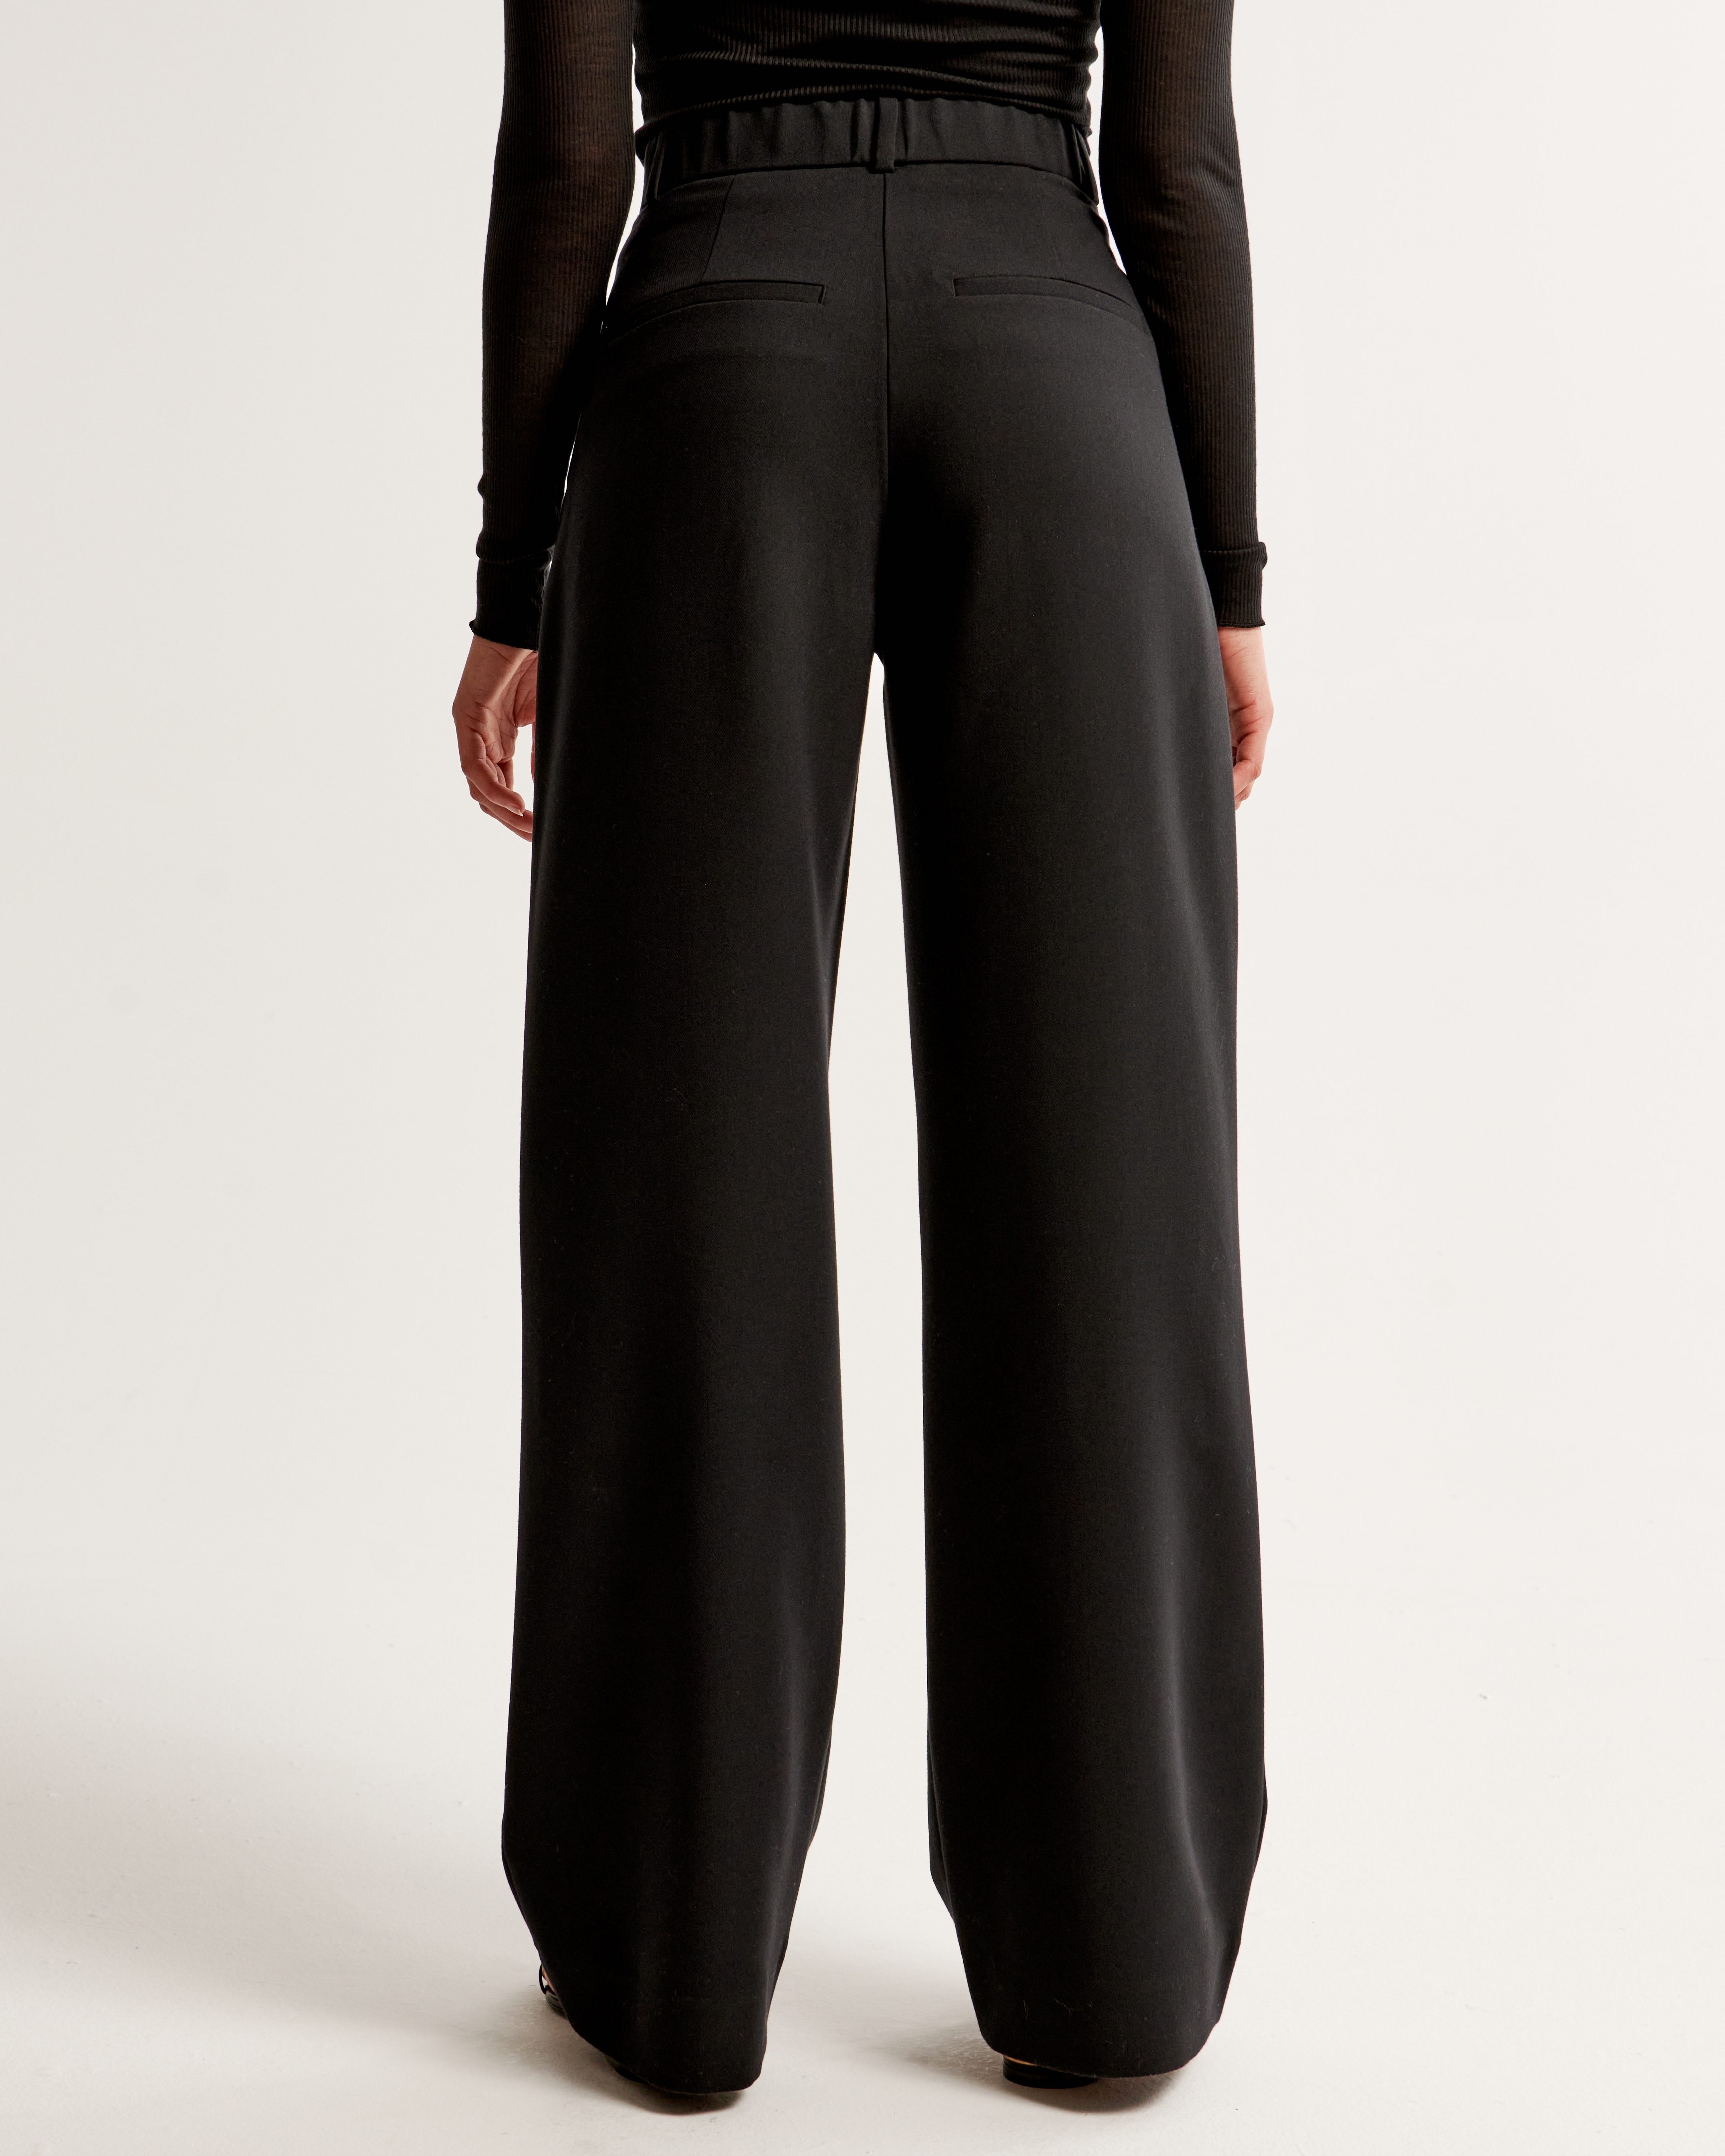 A&F Sloane Tailored Pant